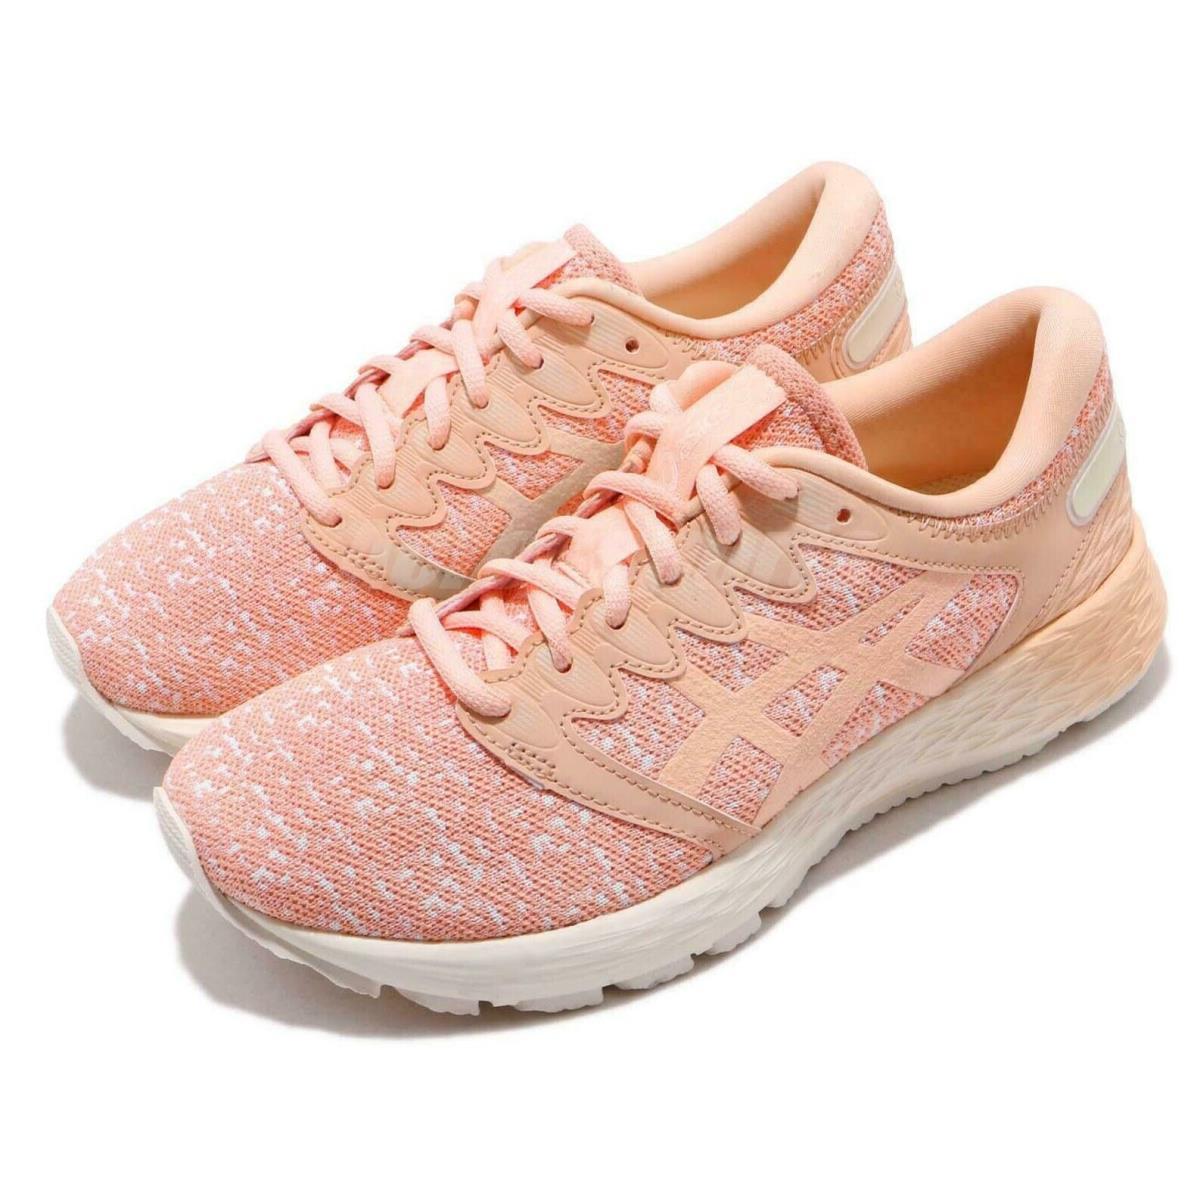 Asics Roadhawk FF 2 MX Baked Pink 1012A232-700 Women`s Casual Running Shoes